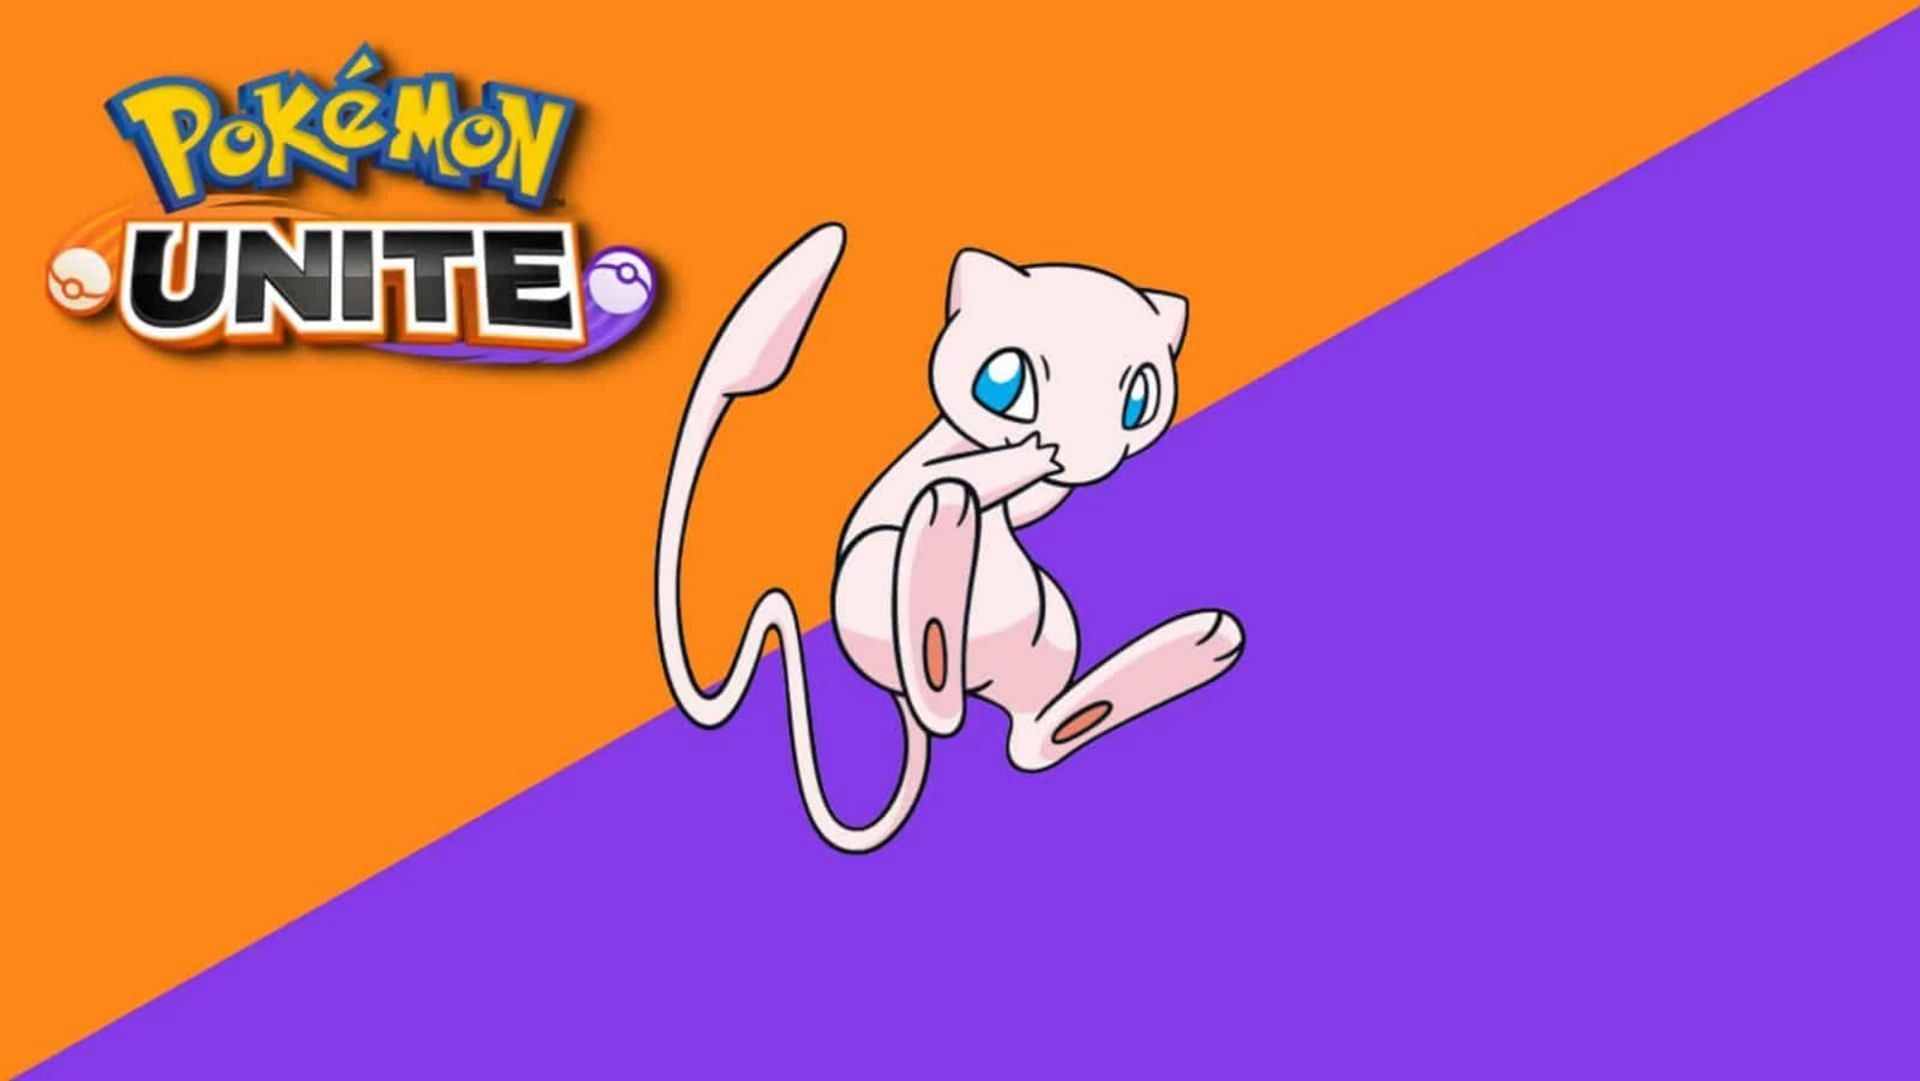 How To Get Mew For Free In Pokemon Unite